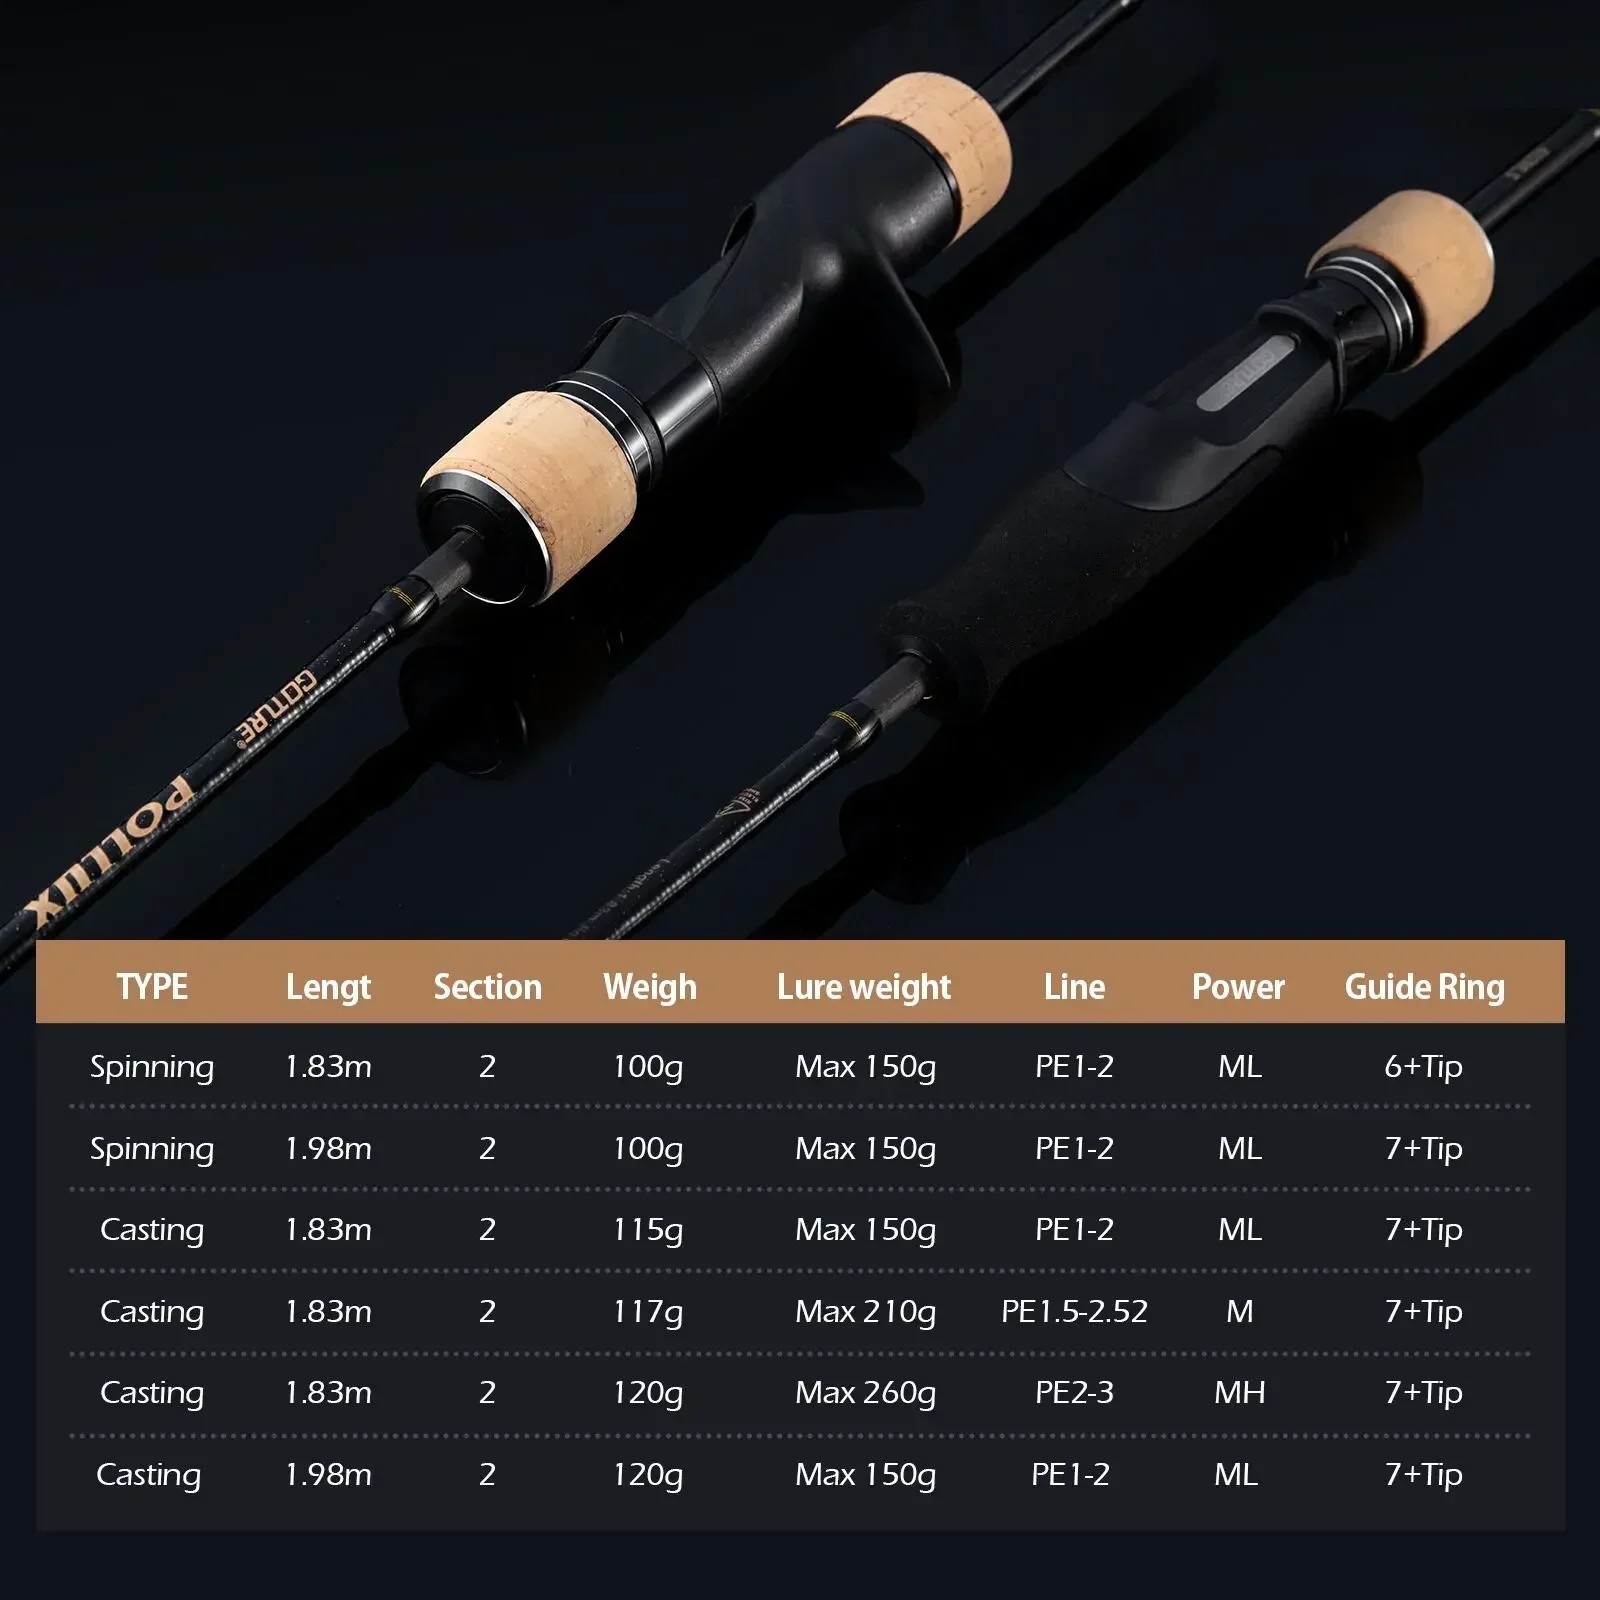 Goture Pollux Slow Fast Boat Rod 100%Fuji Guide Ring Jigging Fishing Rod  1.83m 1.98m Spinning/Casting ML M MH Action Sea pole - AliExpress